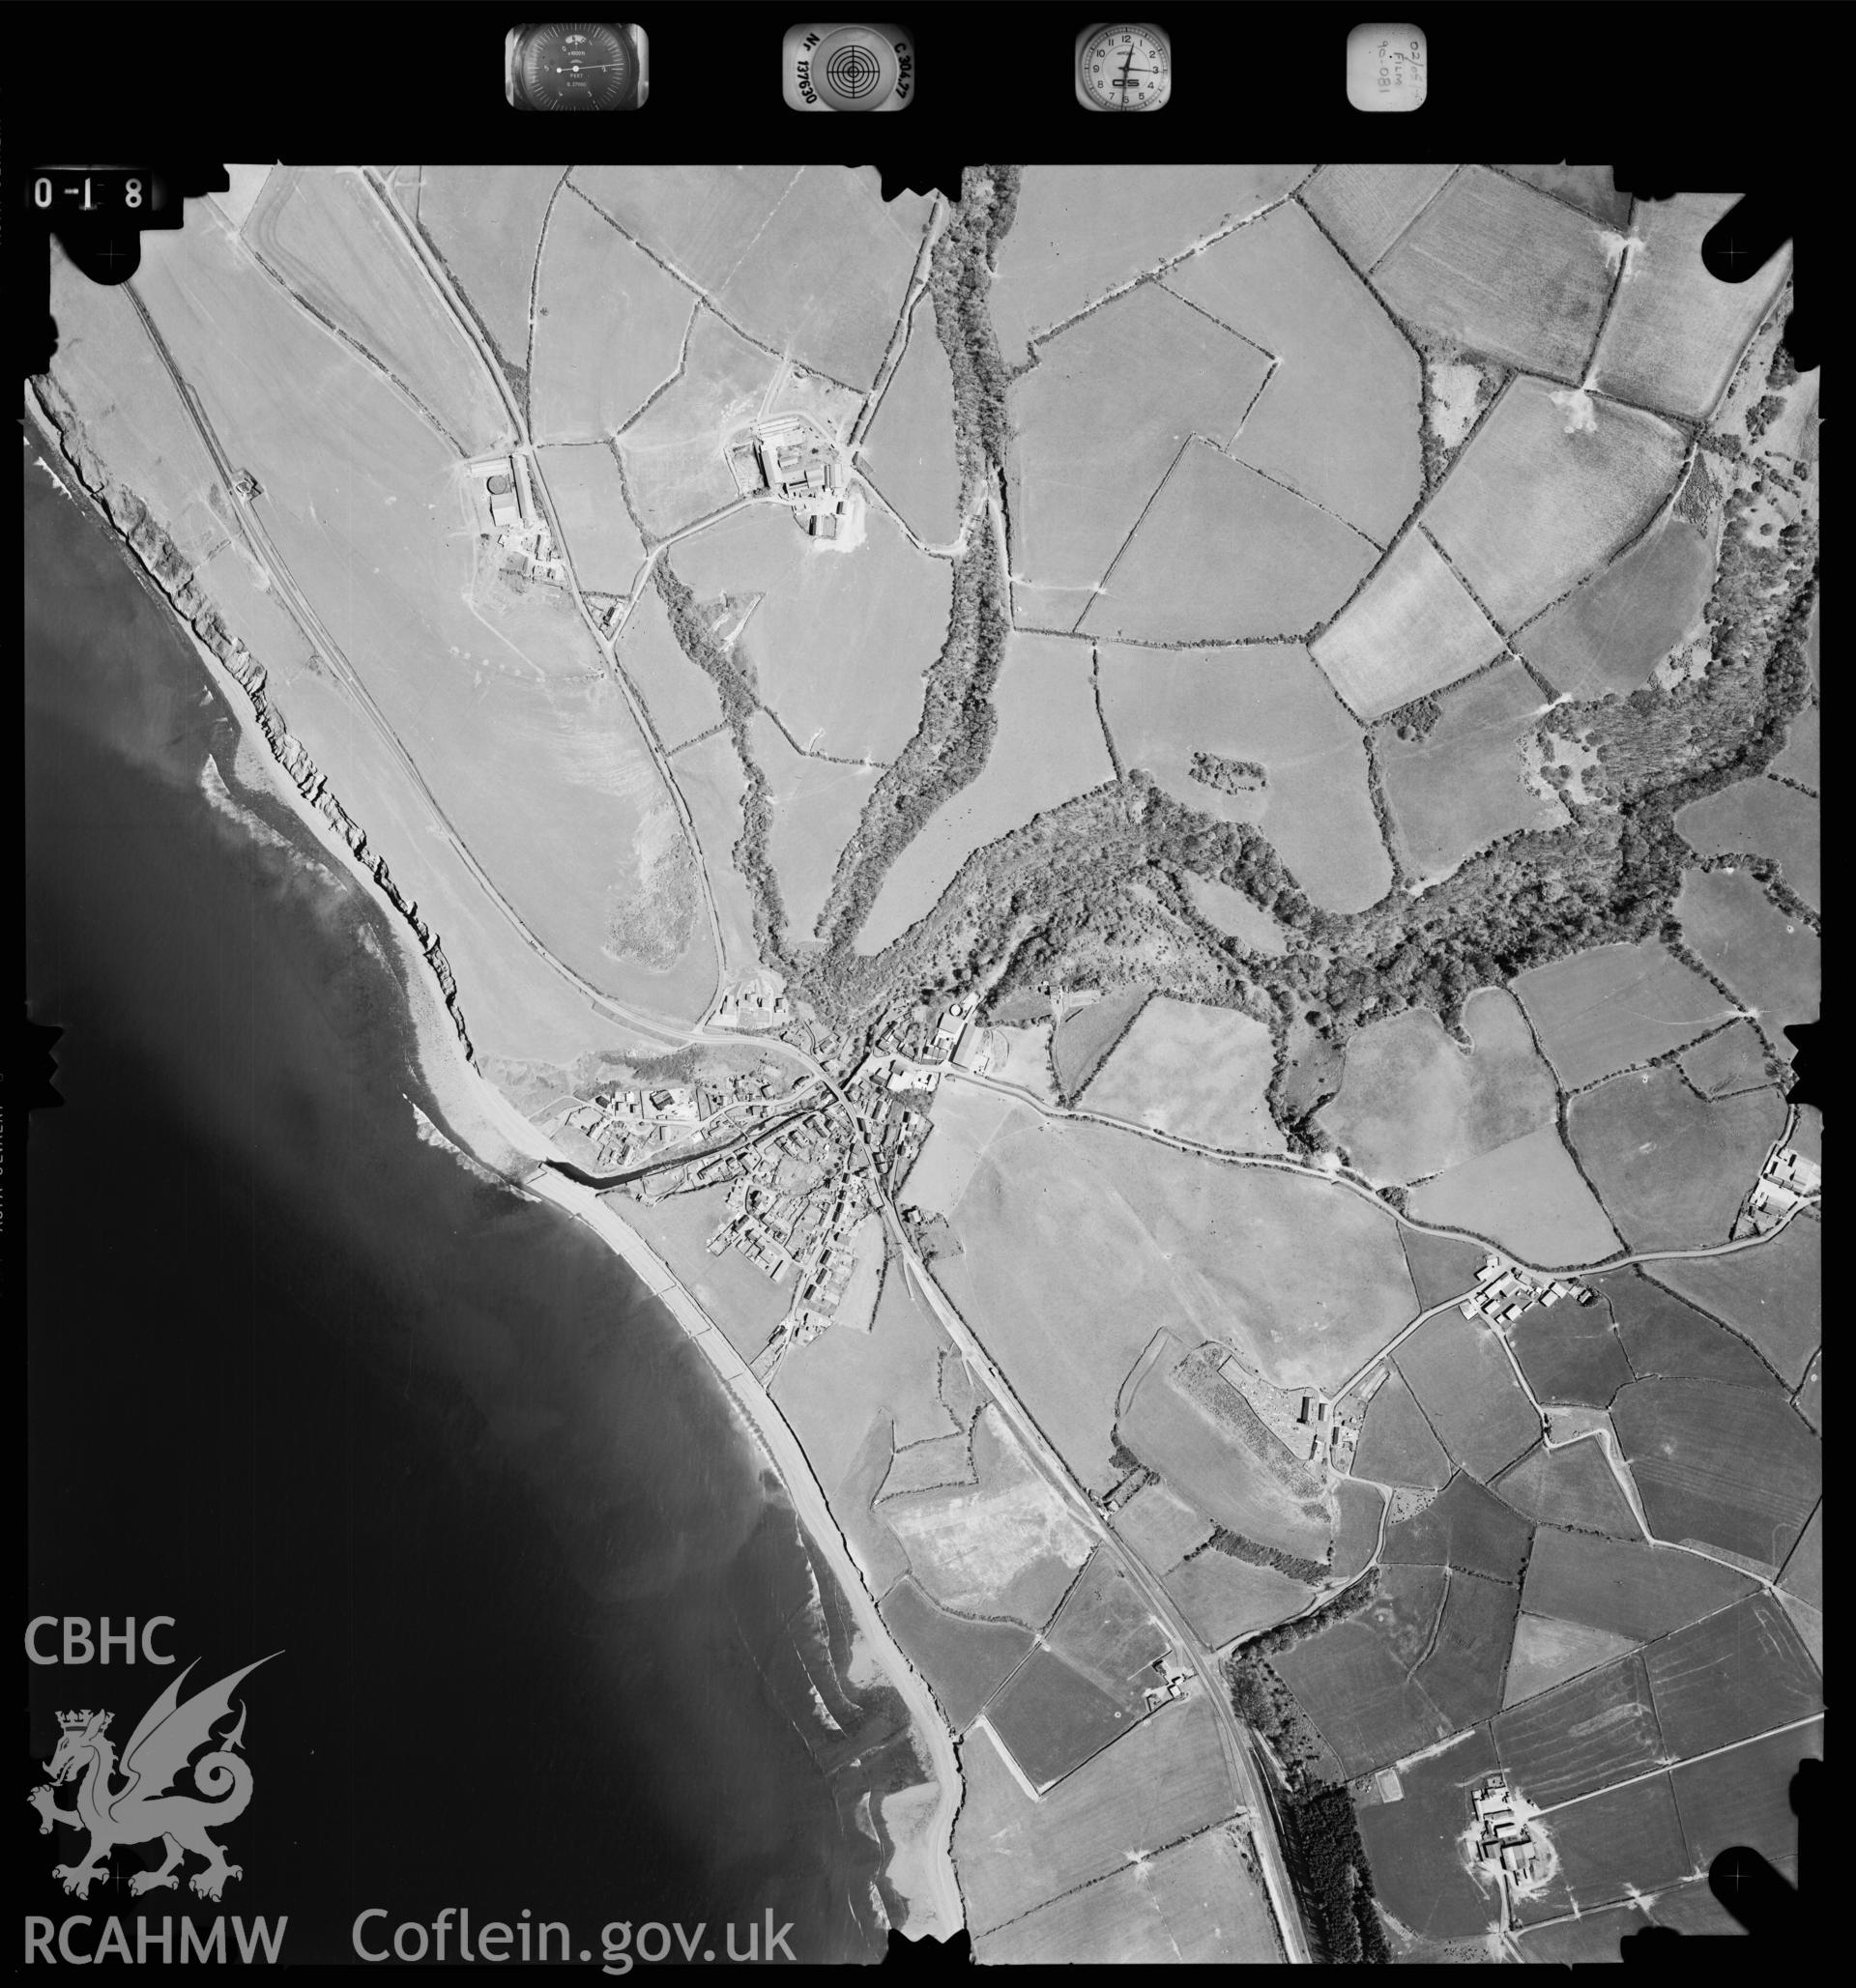 Digitized copy of an aerial photograph showing the Aberarth area taken by Ordnance Survey, 1990.